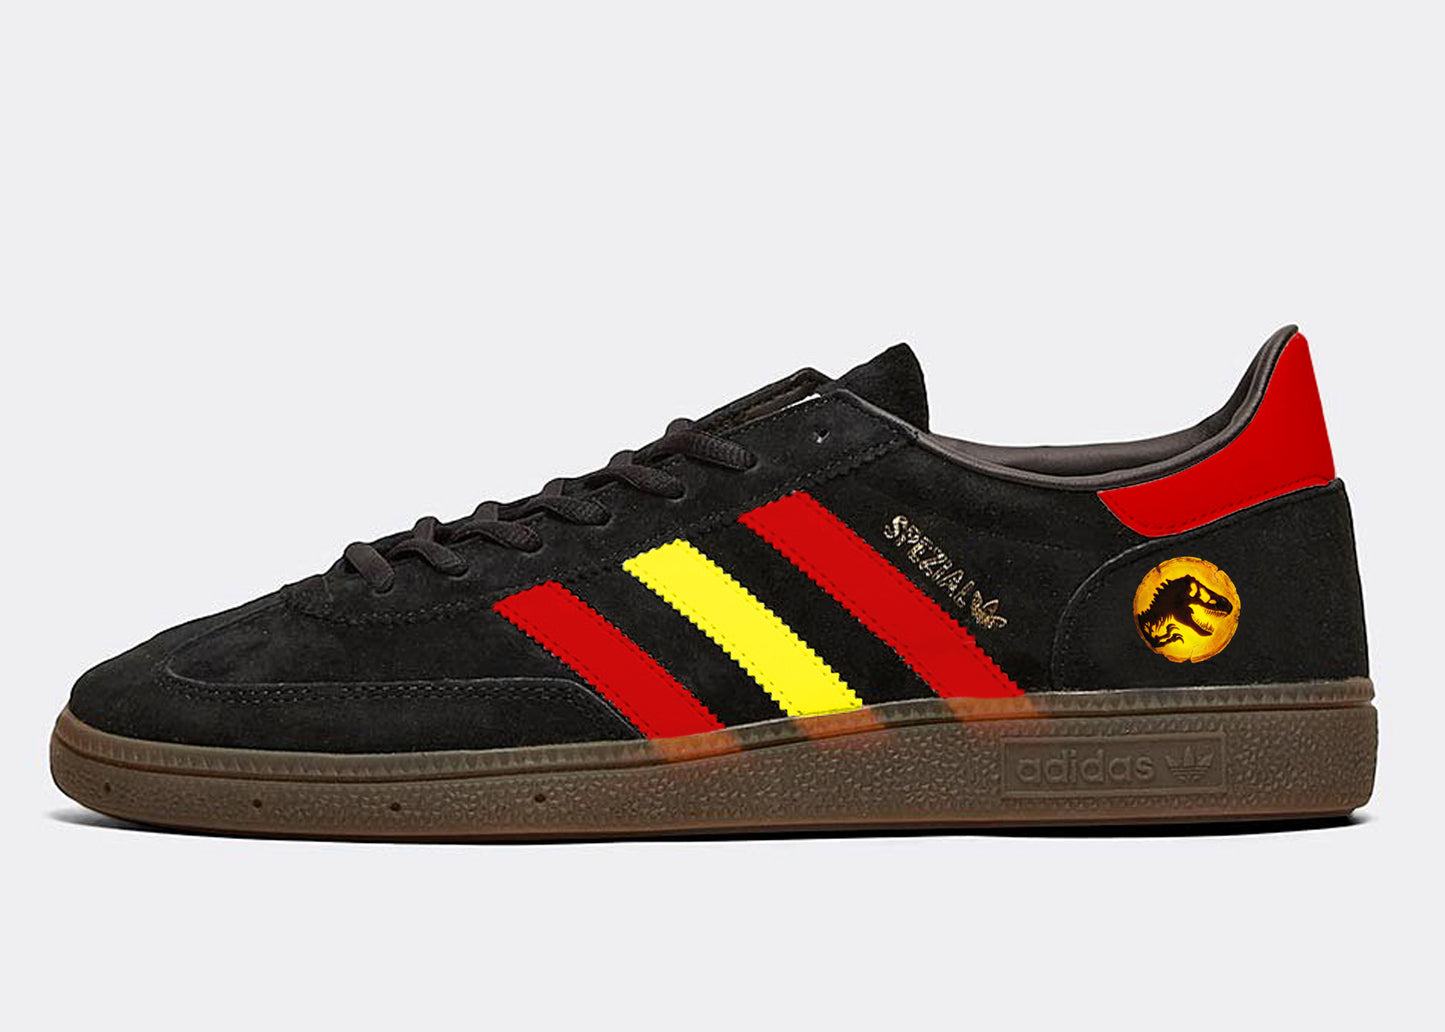 Limited edition Jurassic Park inspired black / red/ yellow Adidas custom Handball Spezial trainers / sneakers